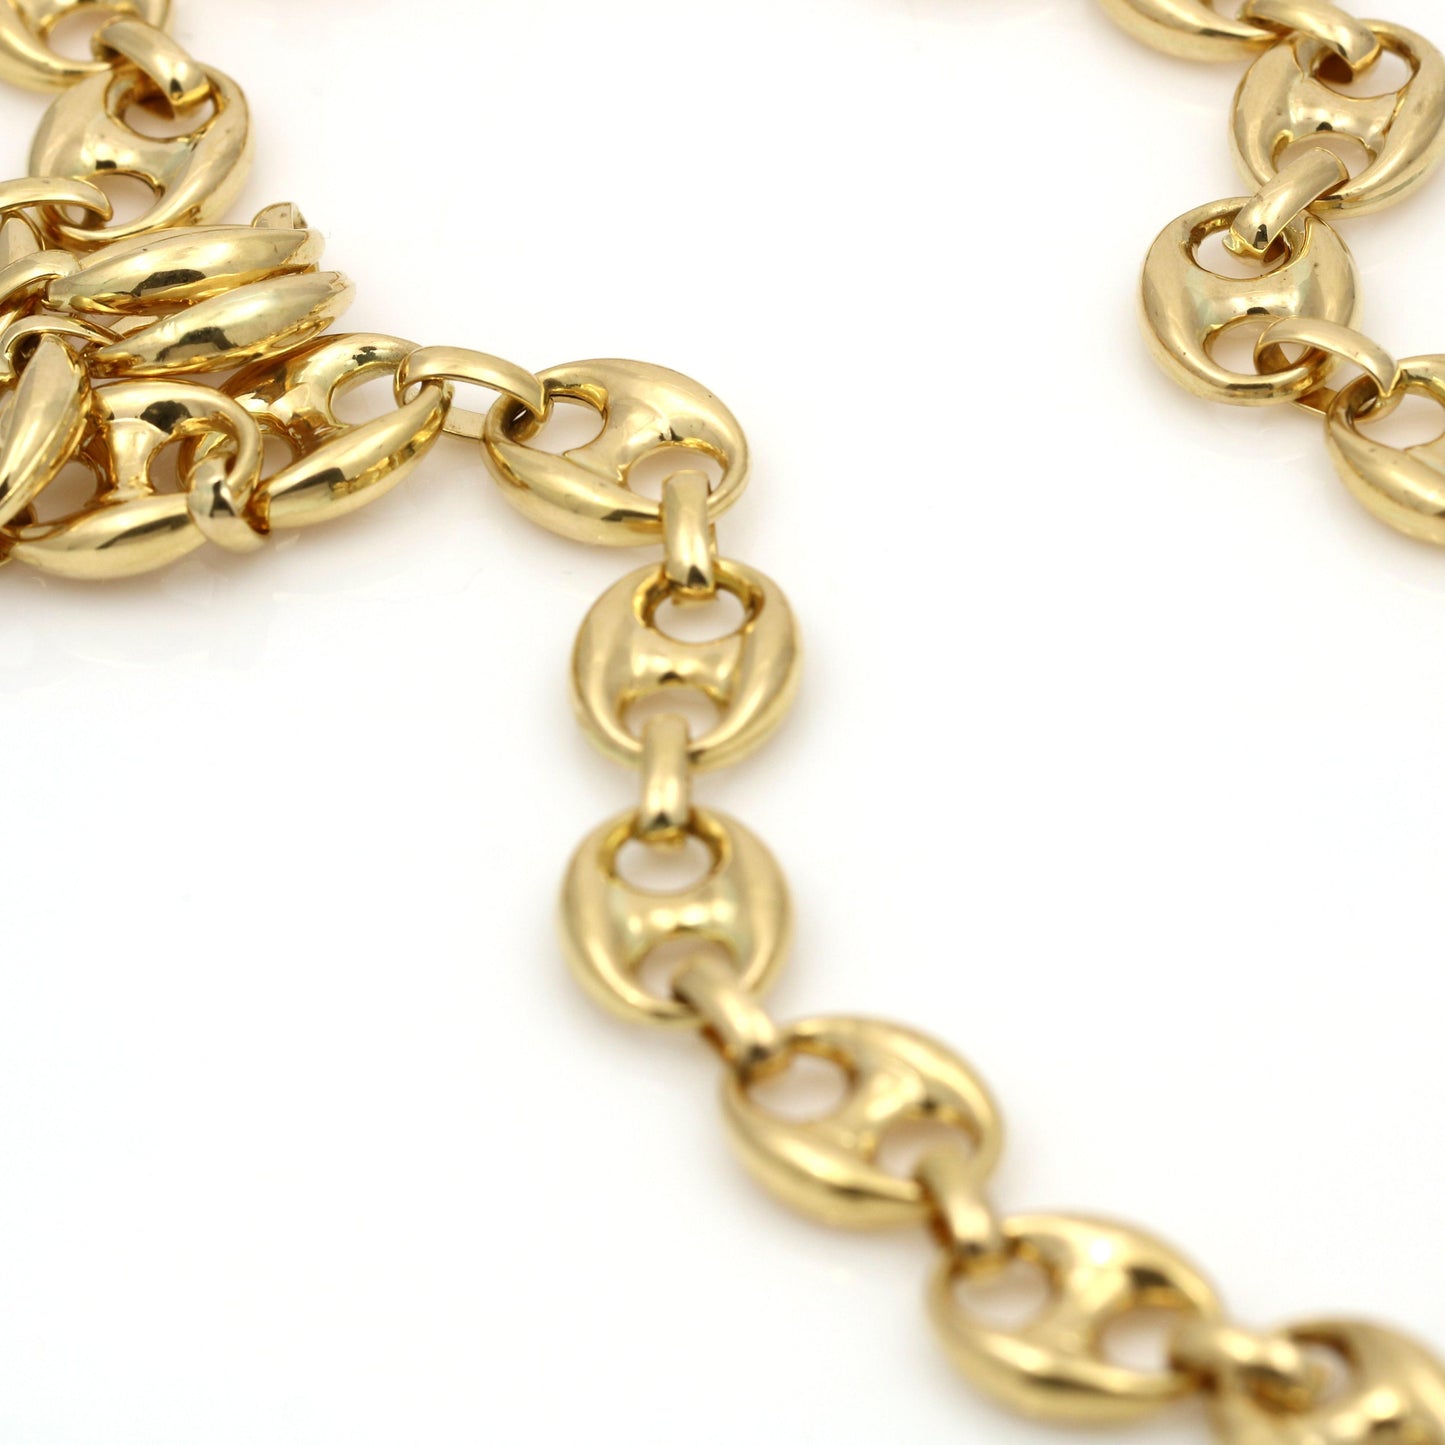 Mariner's Puff Link 10.5mm 18k Yellow Gold Chain Necklace 20" - 31 Jewels Inc.